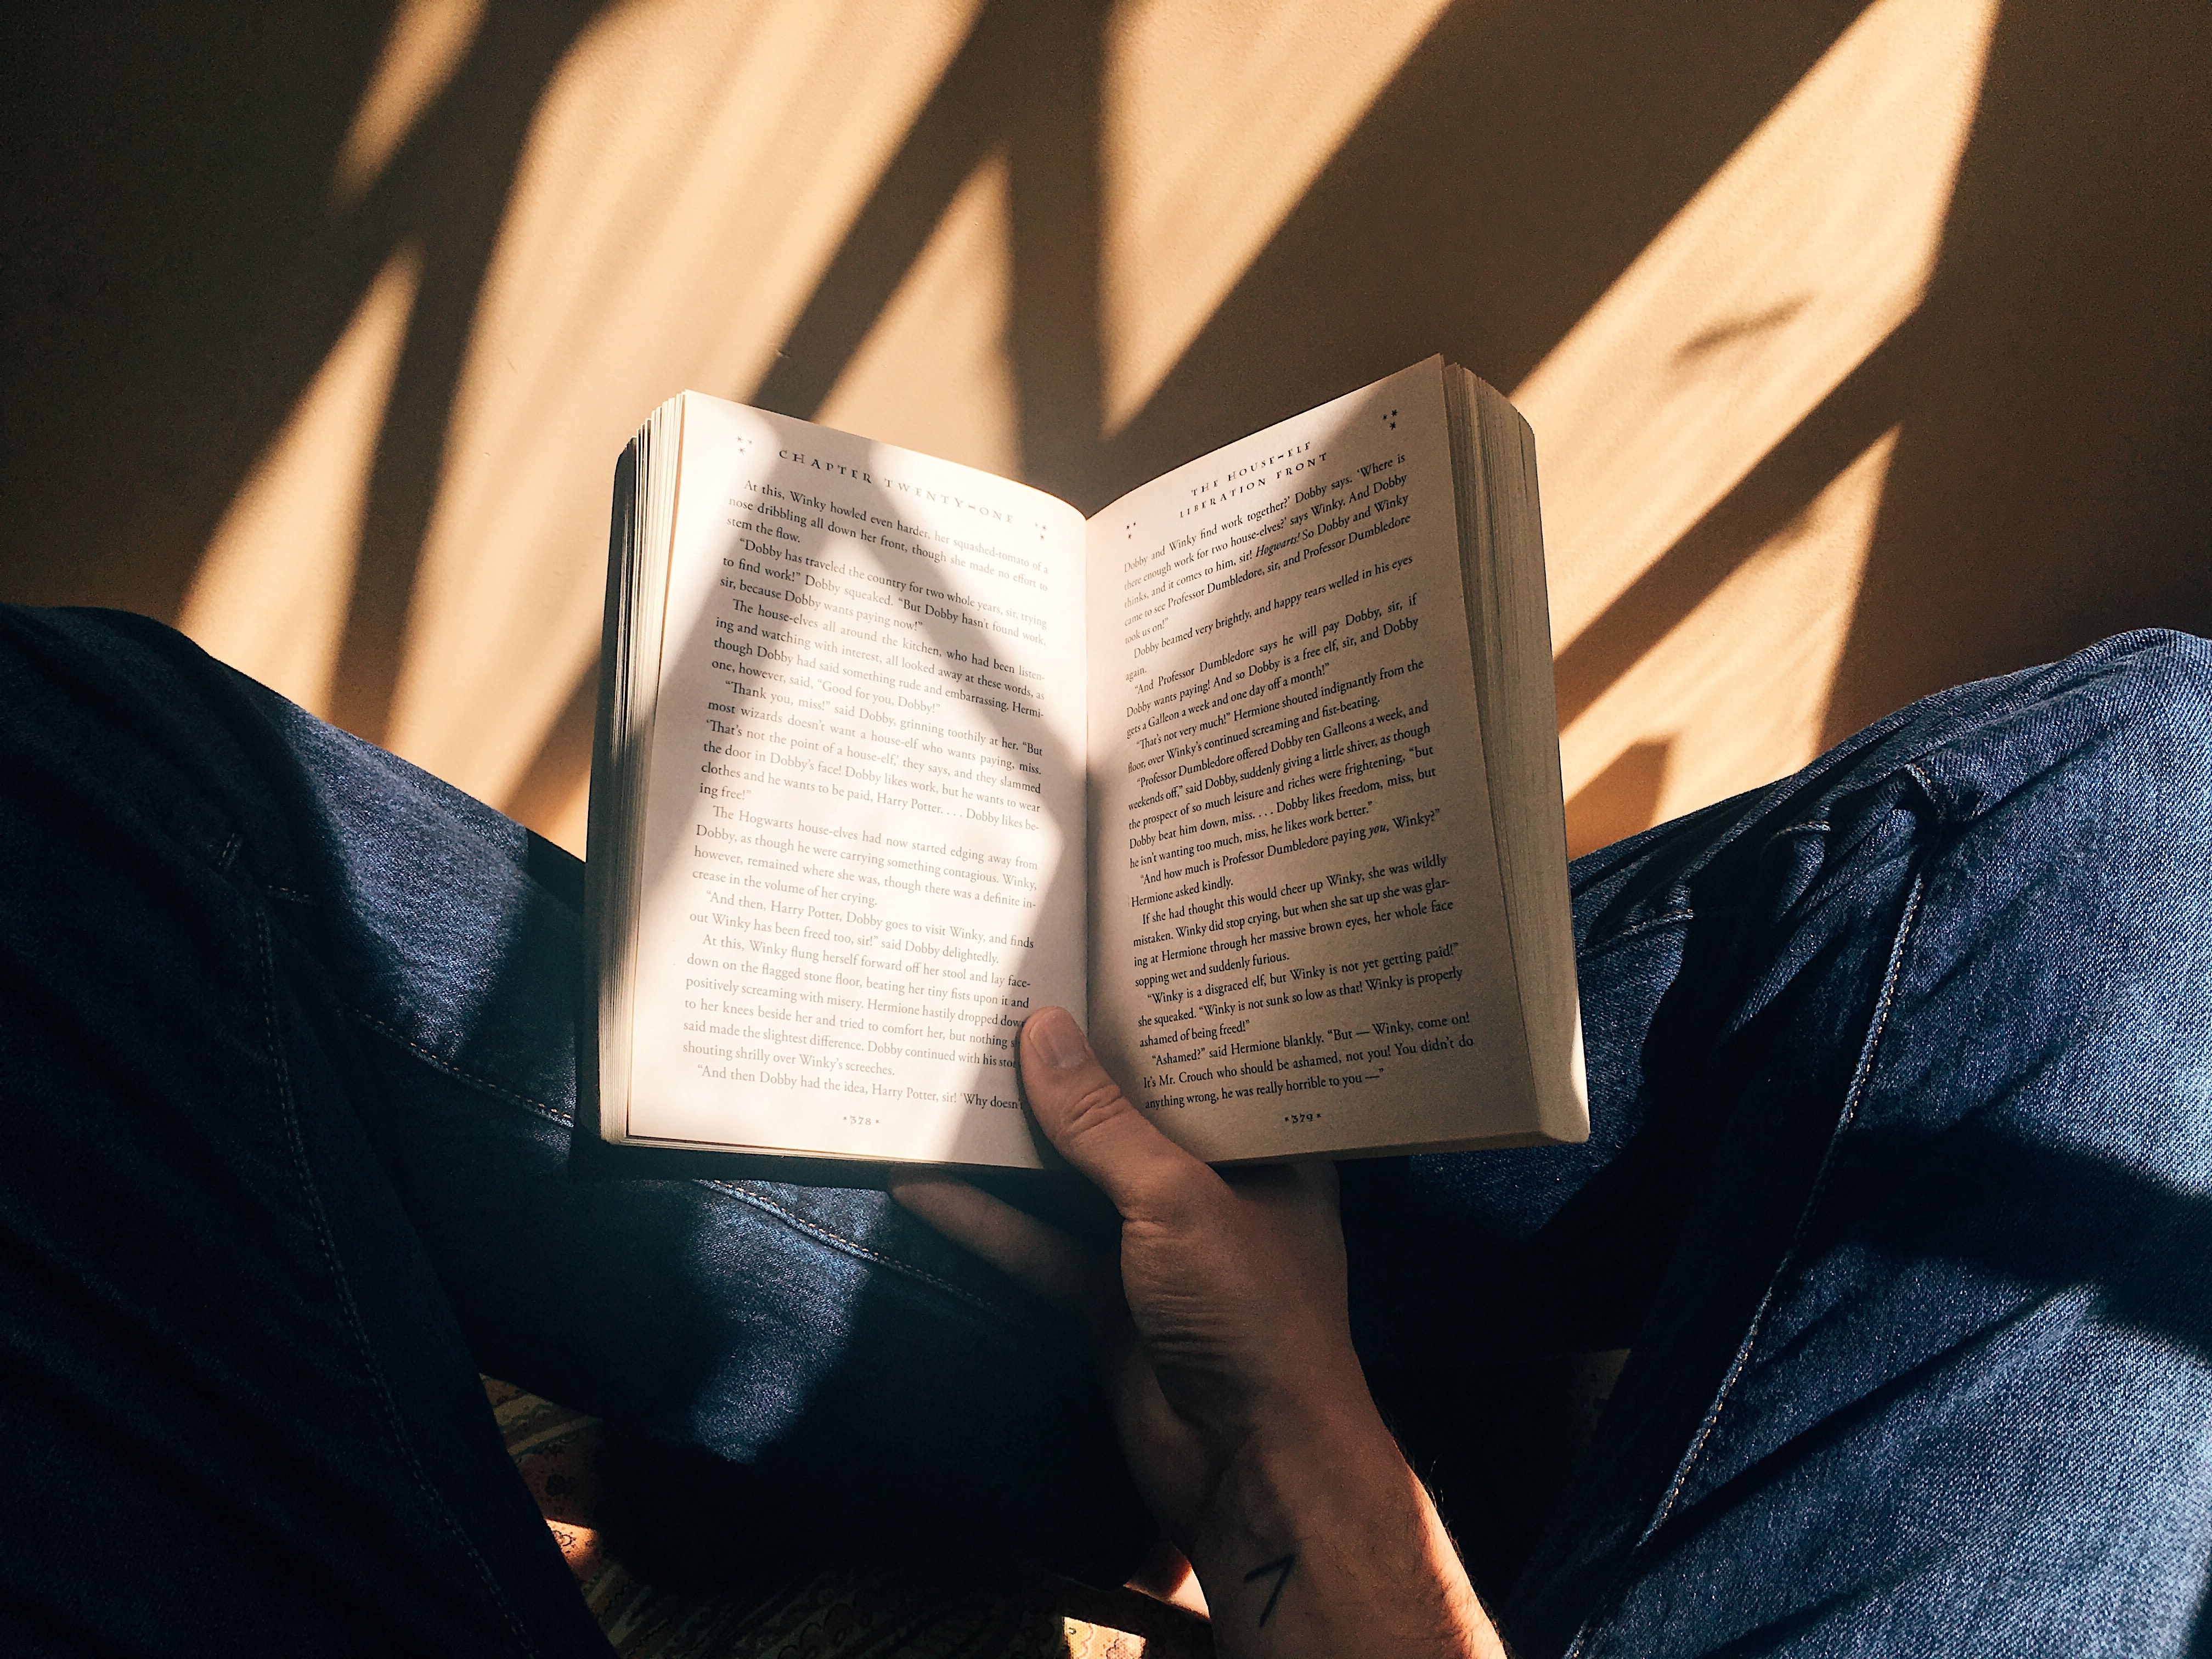  an image of a man sitting and reading a book